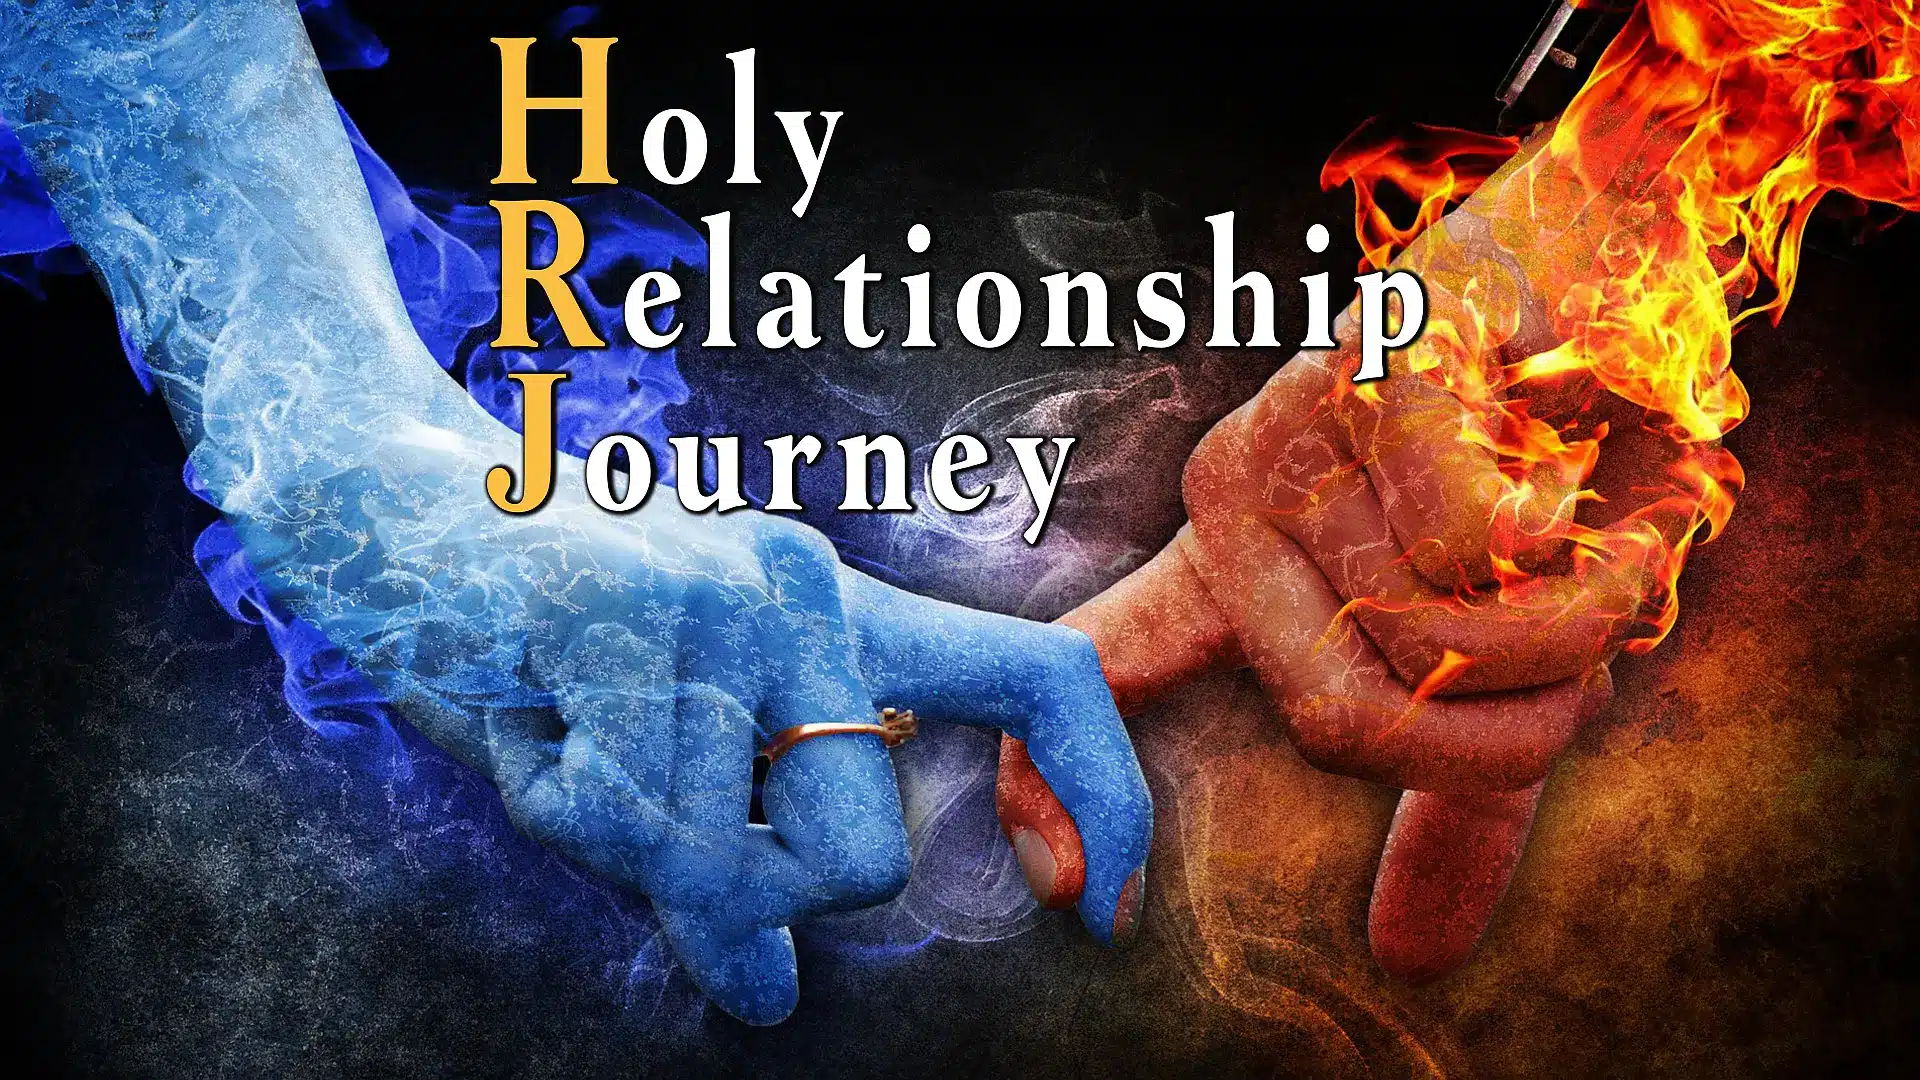 Take Me to Truth Academy - Holy Relationship Journey (HRJ)